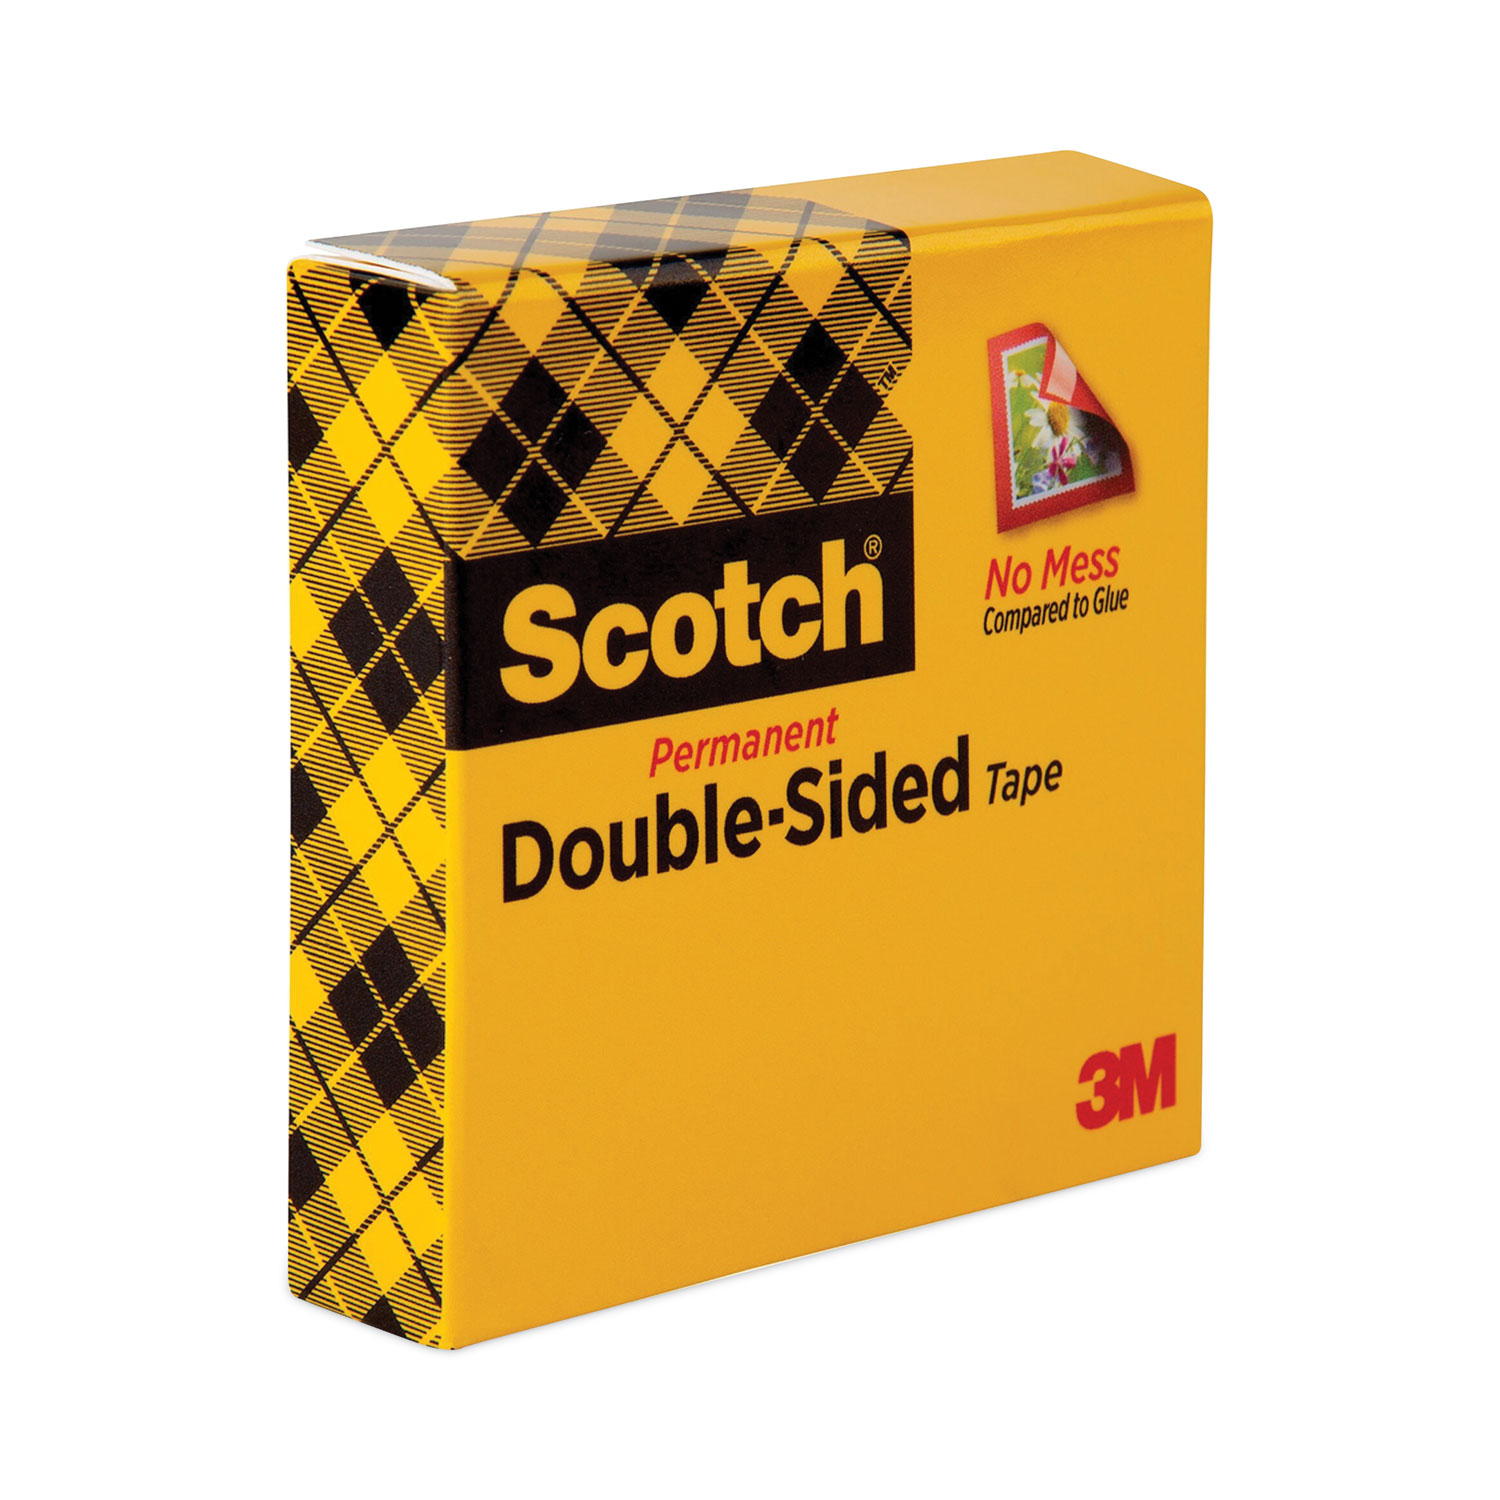 3M Scotch Double Sided Craft Tape – 3 meters –